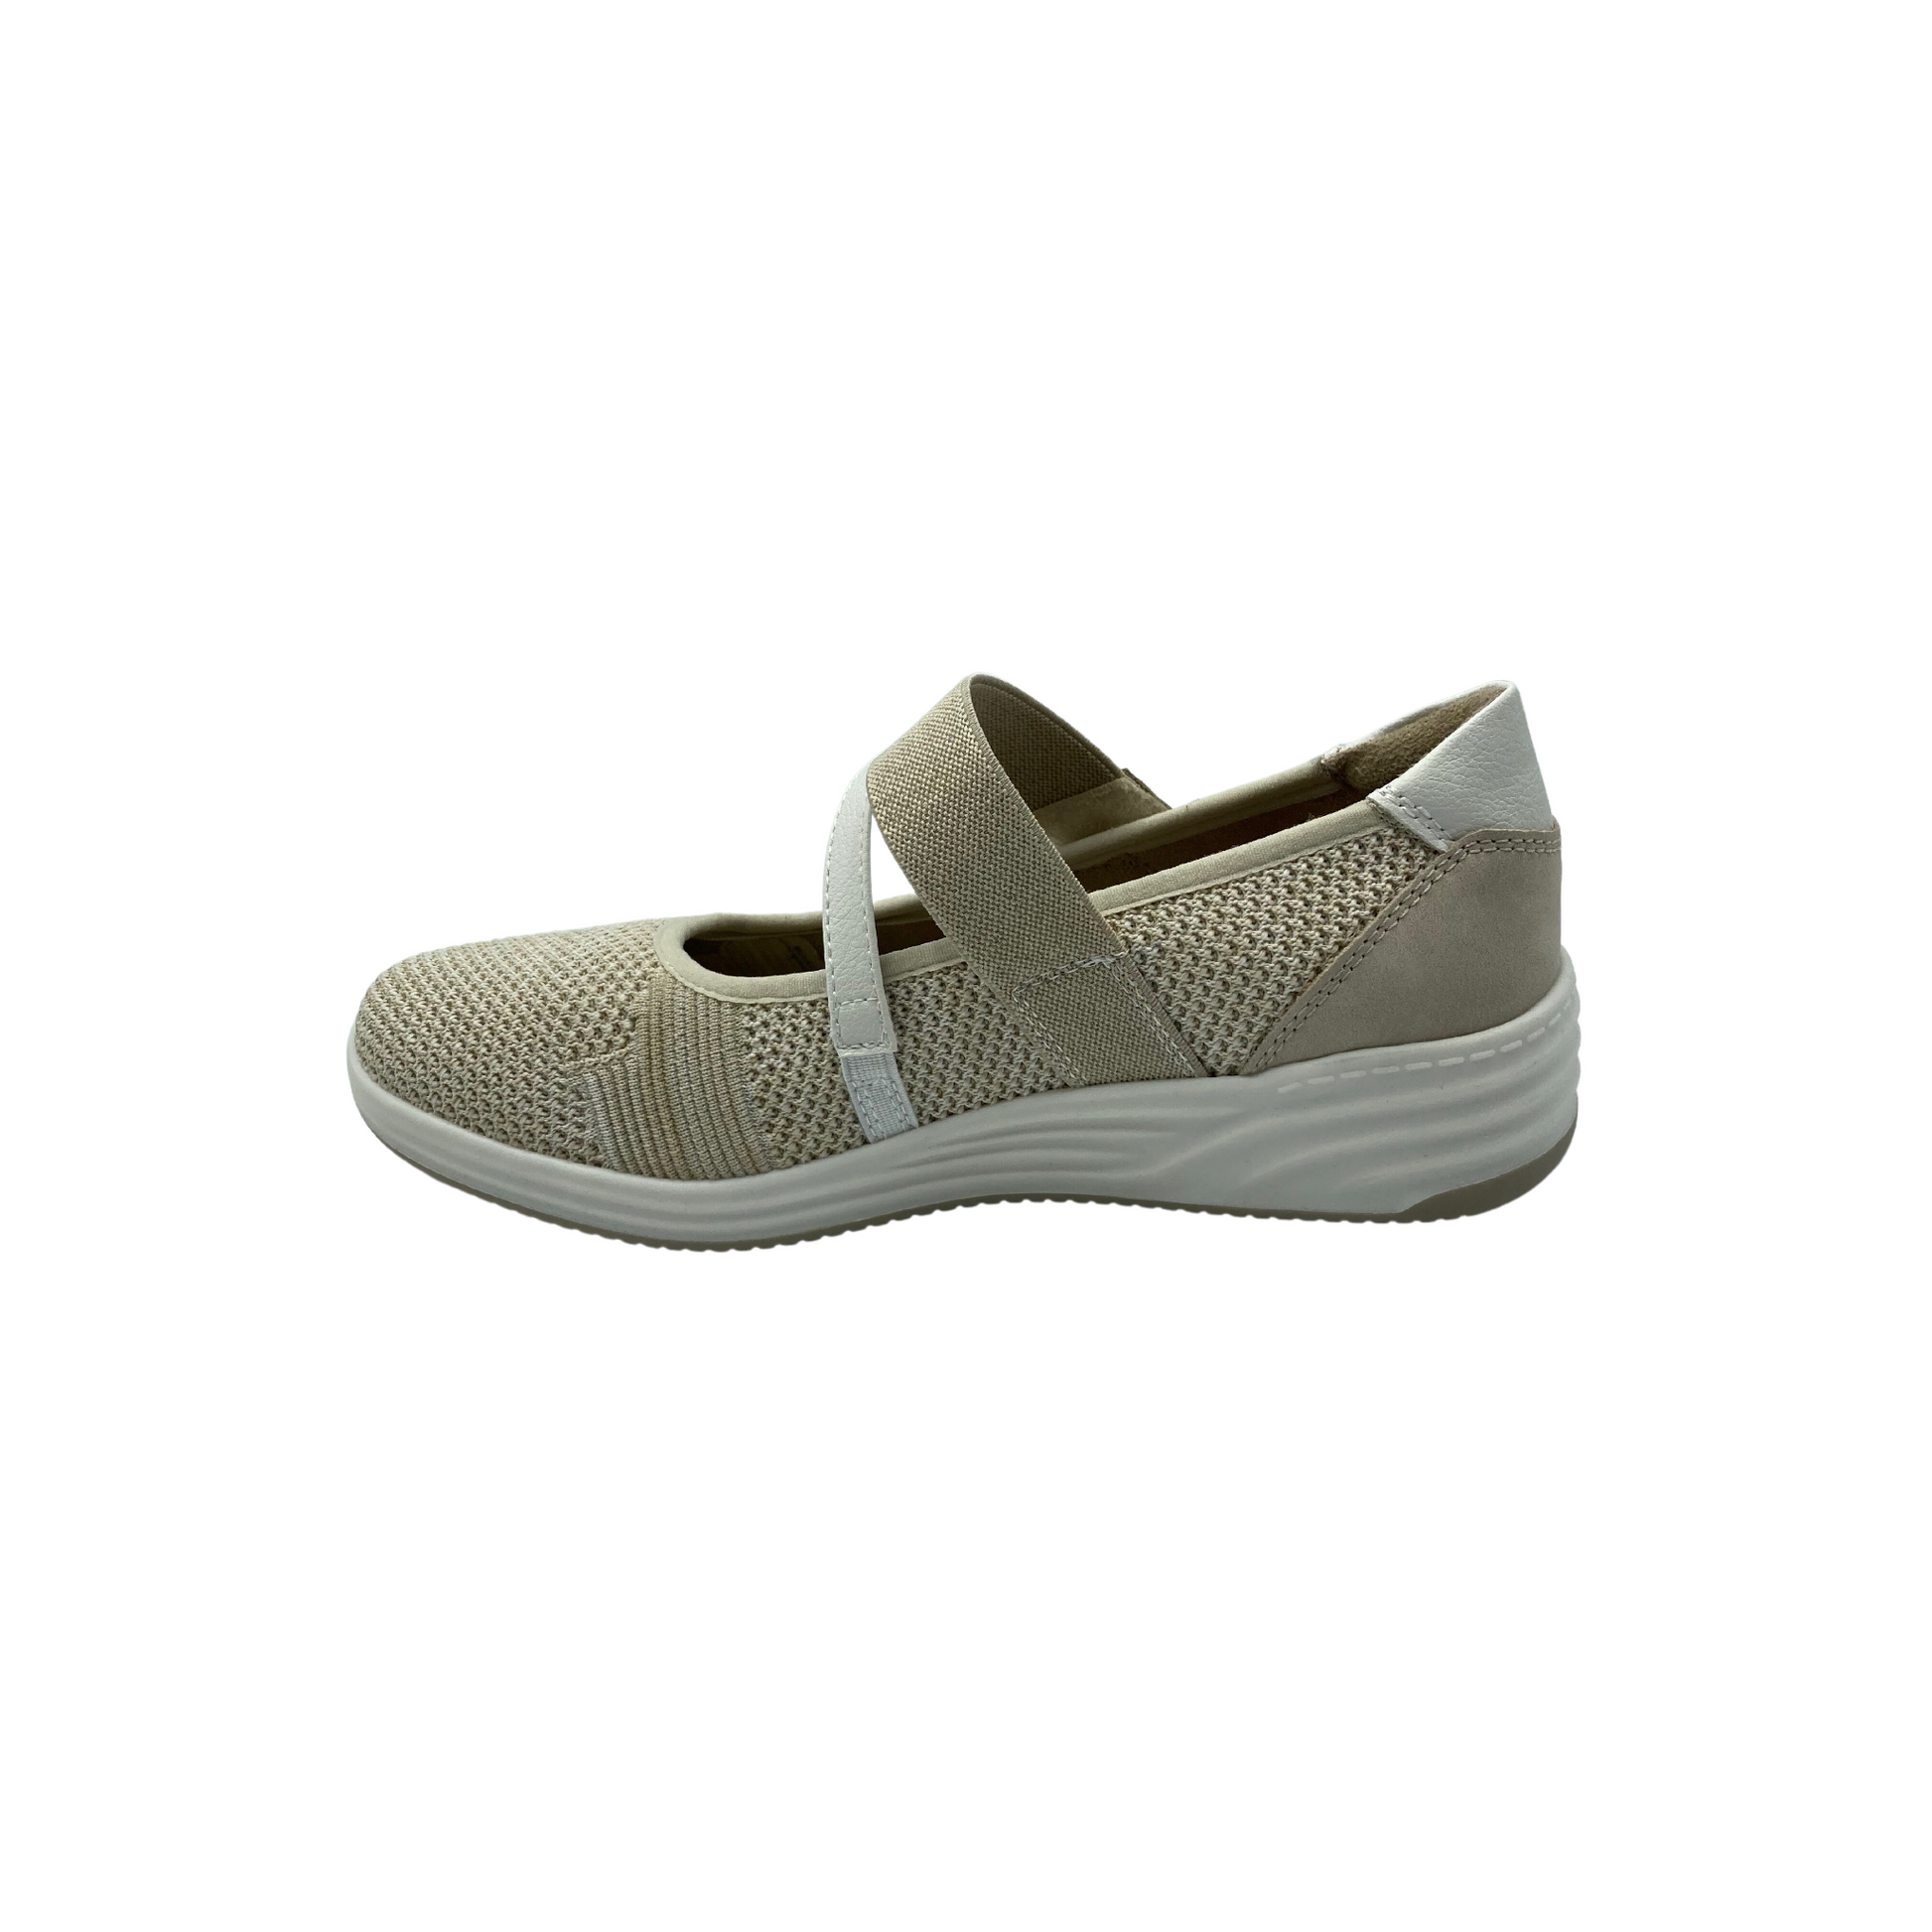 Inside view of a cream colored Mary Jane style shoe done in a non leather material.  Very sporty looking with white sole 